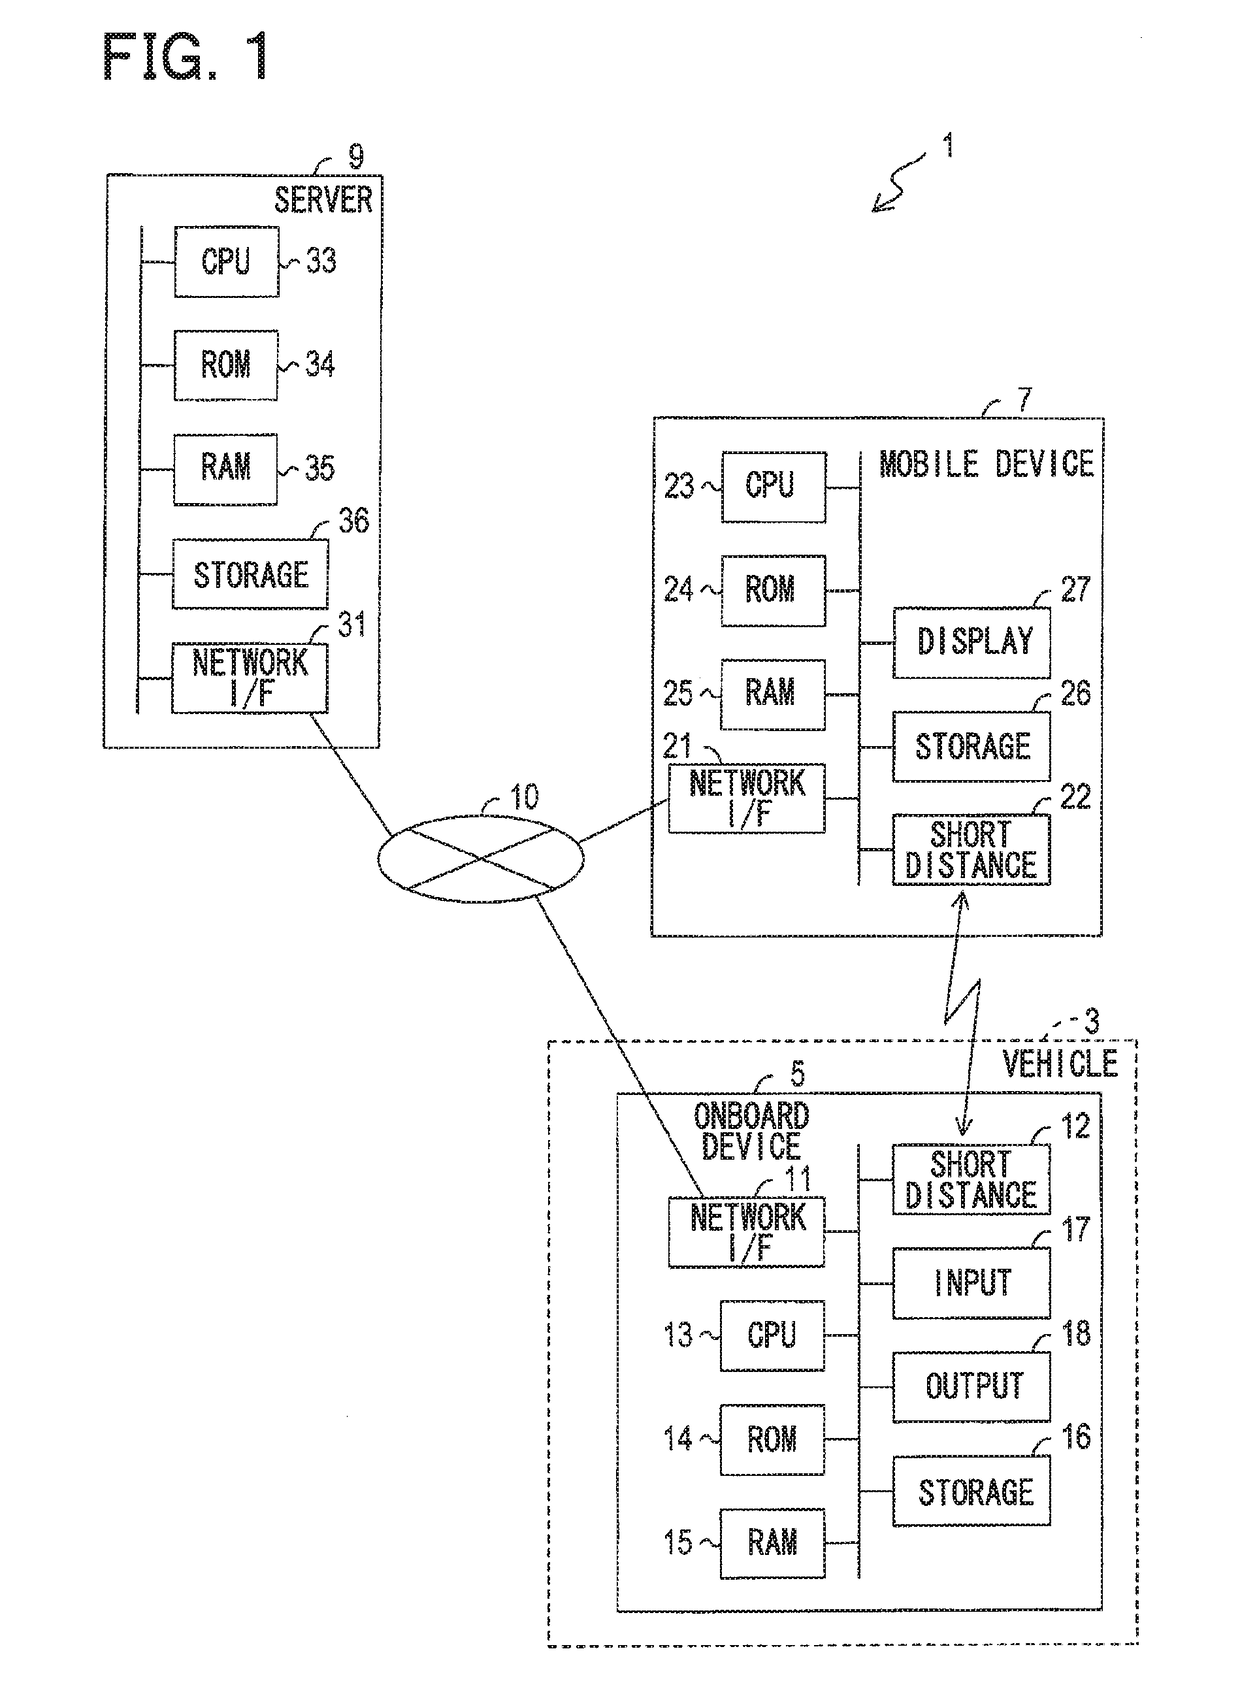 Vehicle communication system, onboard apparatus, and key issuing apparatus